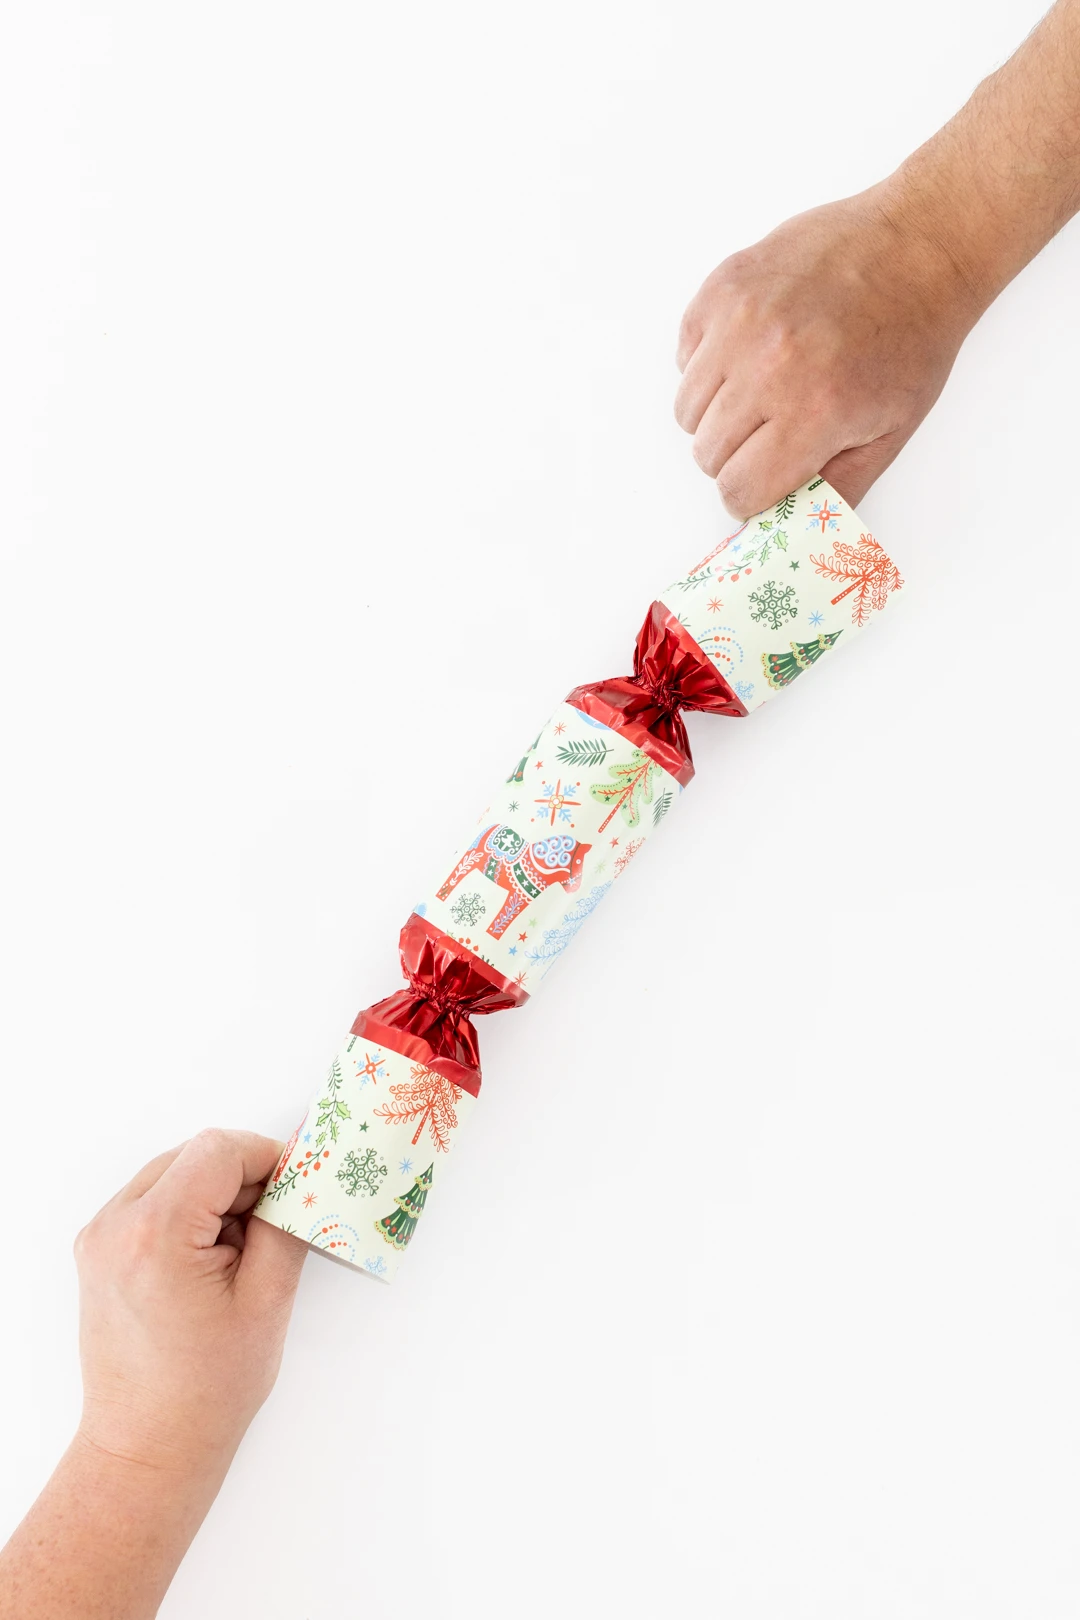 Two people tugging at a Christmas Cracker to demonstrate how to make it pop.